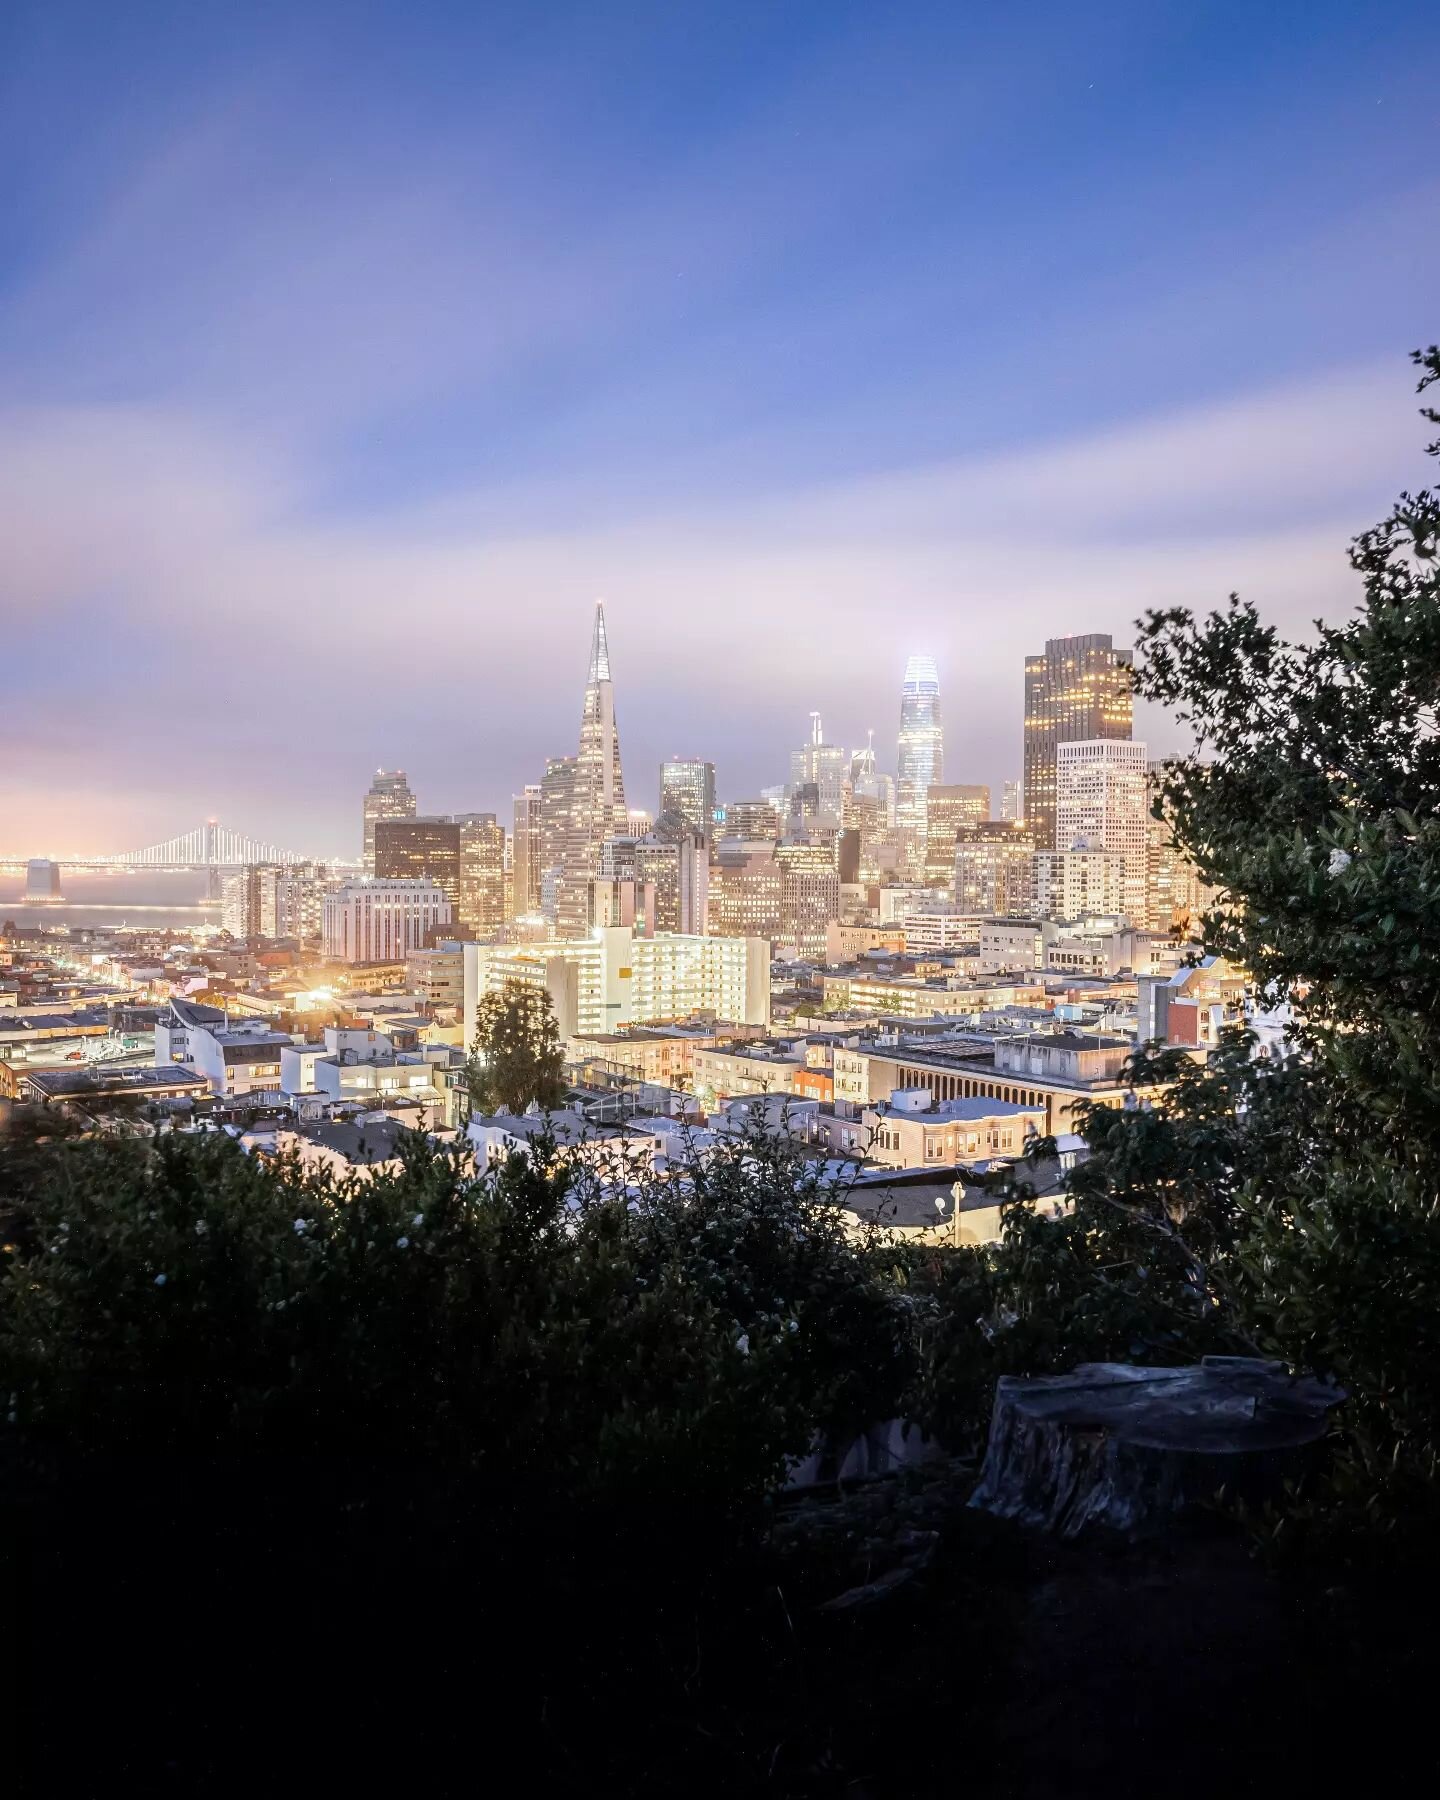 The spectacle of San Francisco's skyline under a layer of fog makes for an unbelievable blue hour.

📸: Z6 II + NIKKOR Z 24-70mm f/4 S from @nikonusa.

#NikonCreators #NikonZ6II #NIKKORZ #NikonNoFilter #OnlyInSF